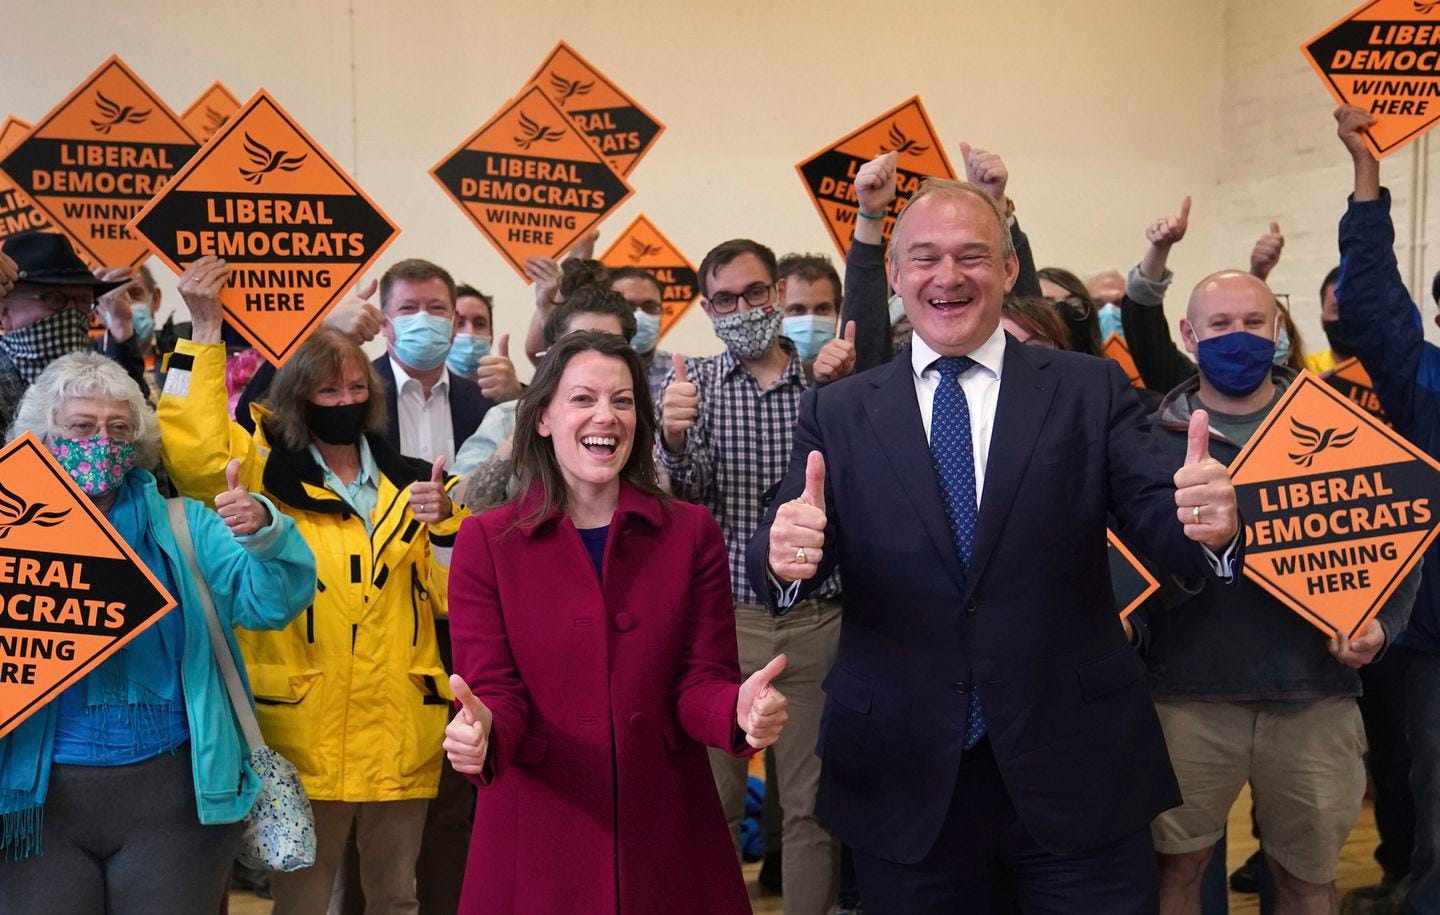 Liberal Democrat leader Ed Davey and new Liberal Democrat MP for Chesham and Amersham Sarah Green celebrated during a victory rally at Chesham Youth Centre on Friday.